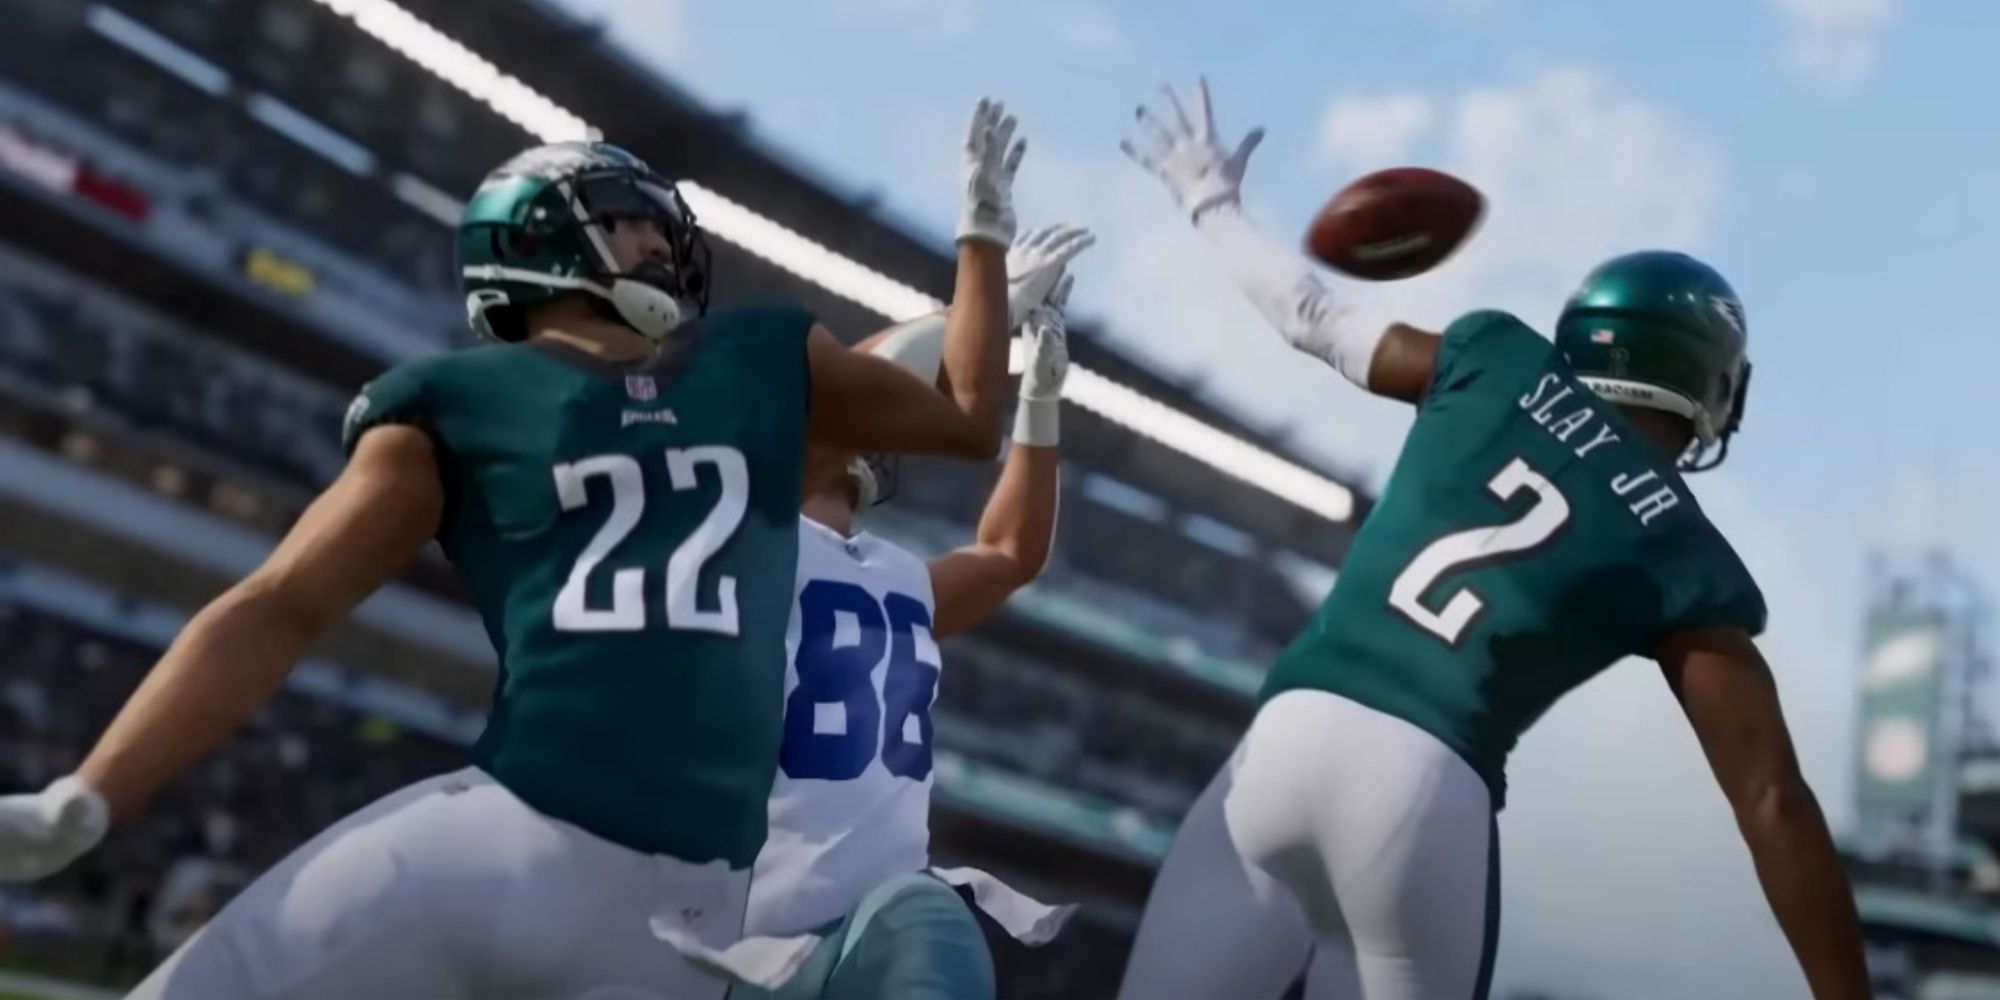 Madden NFL 23 blocks a pass with the Eagles